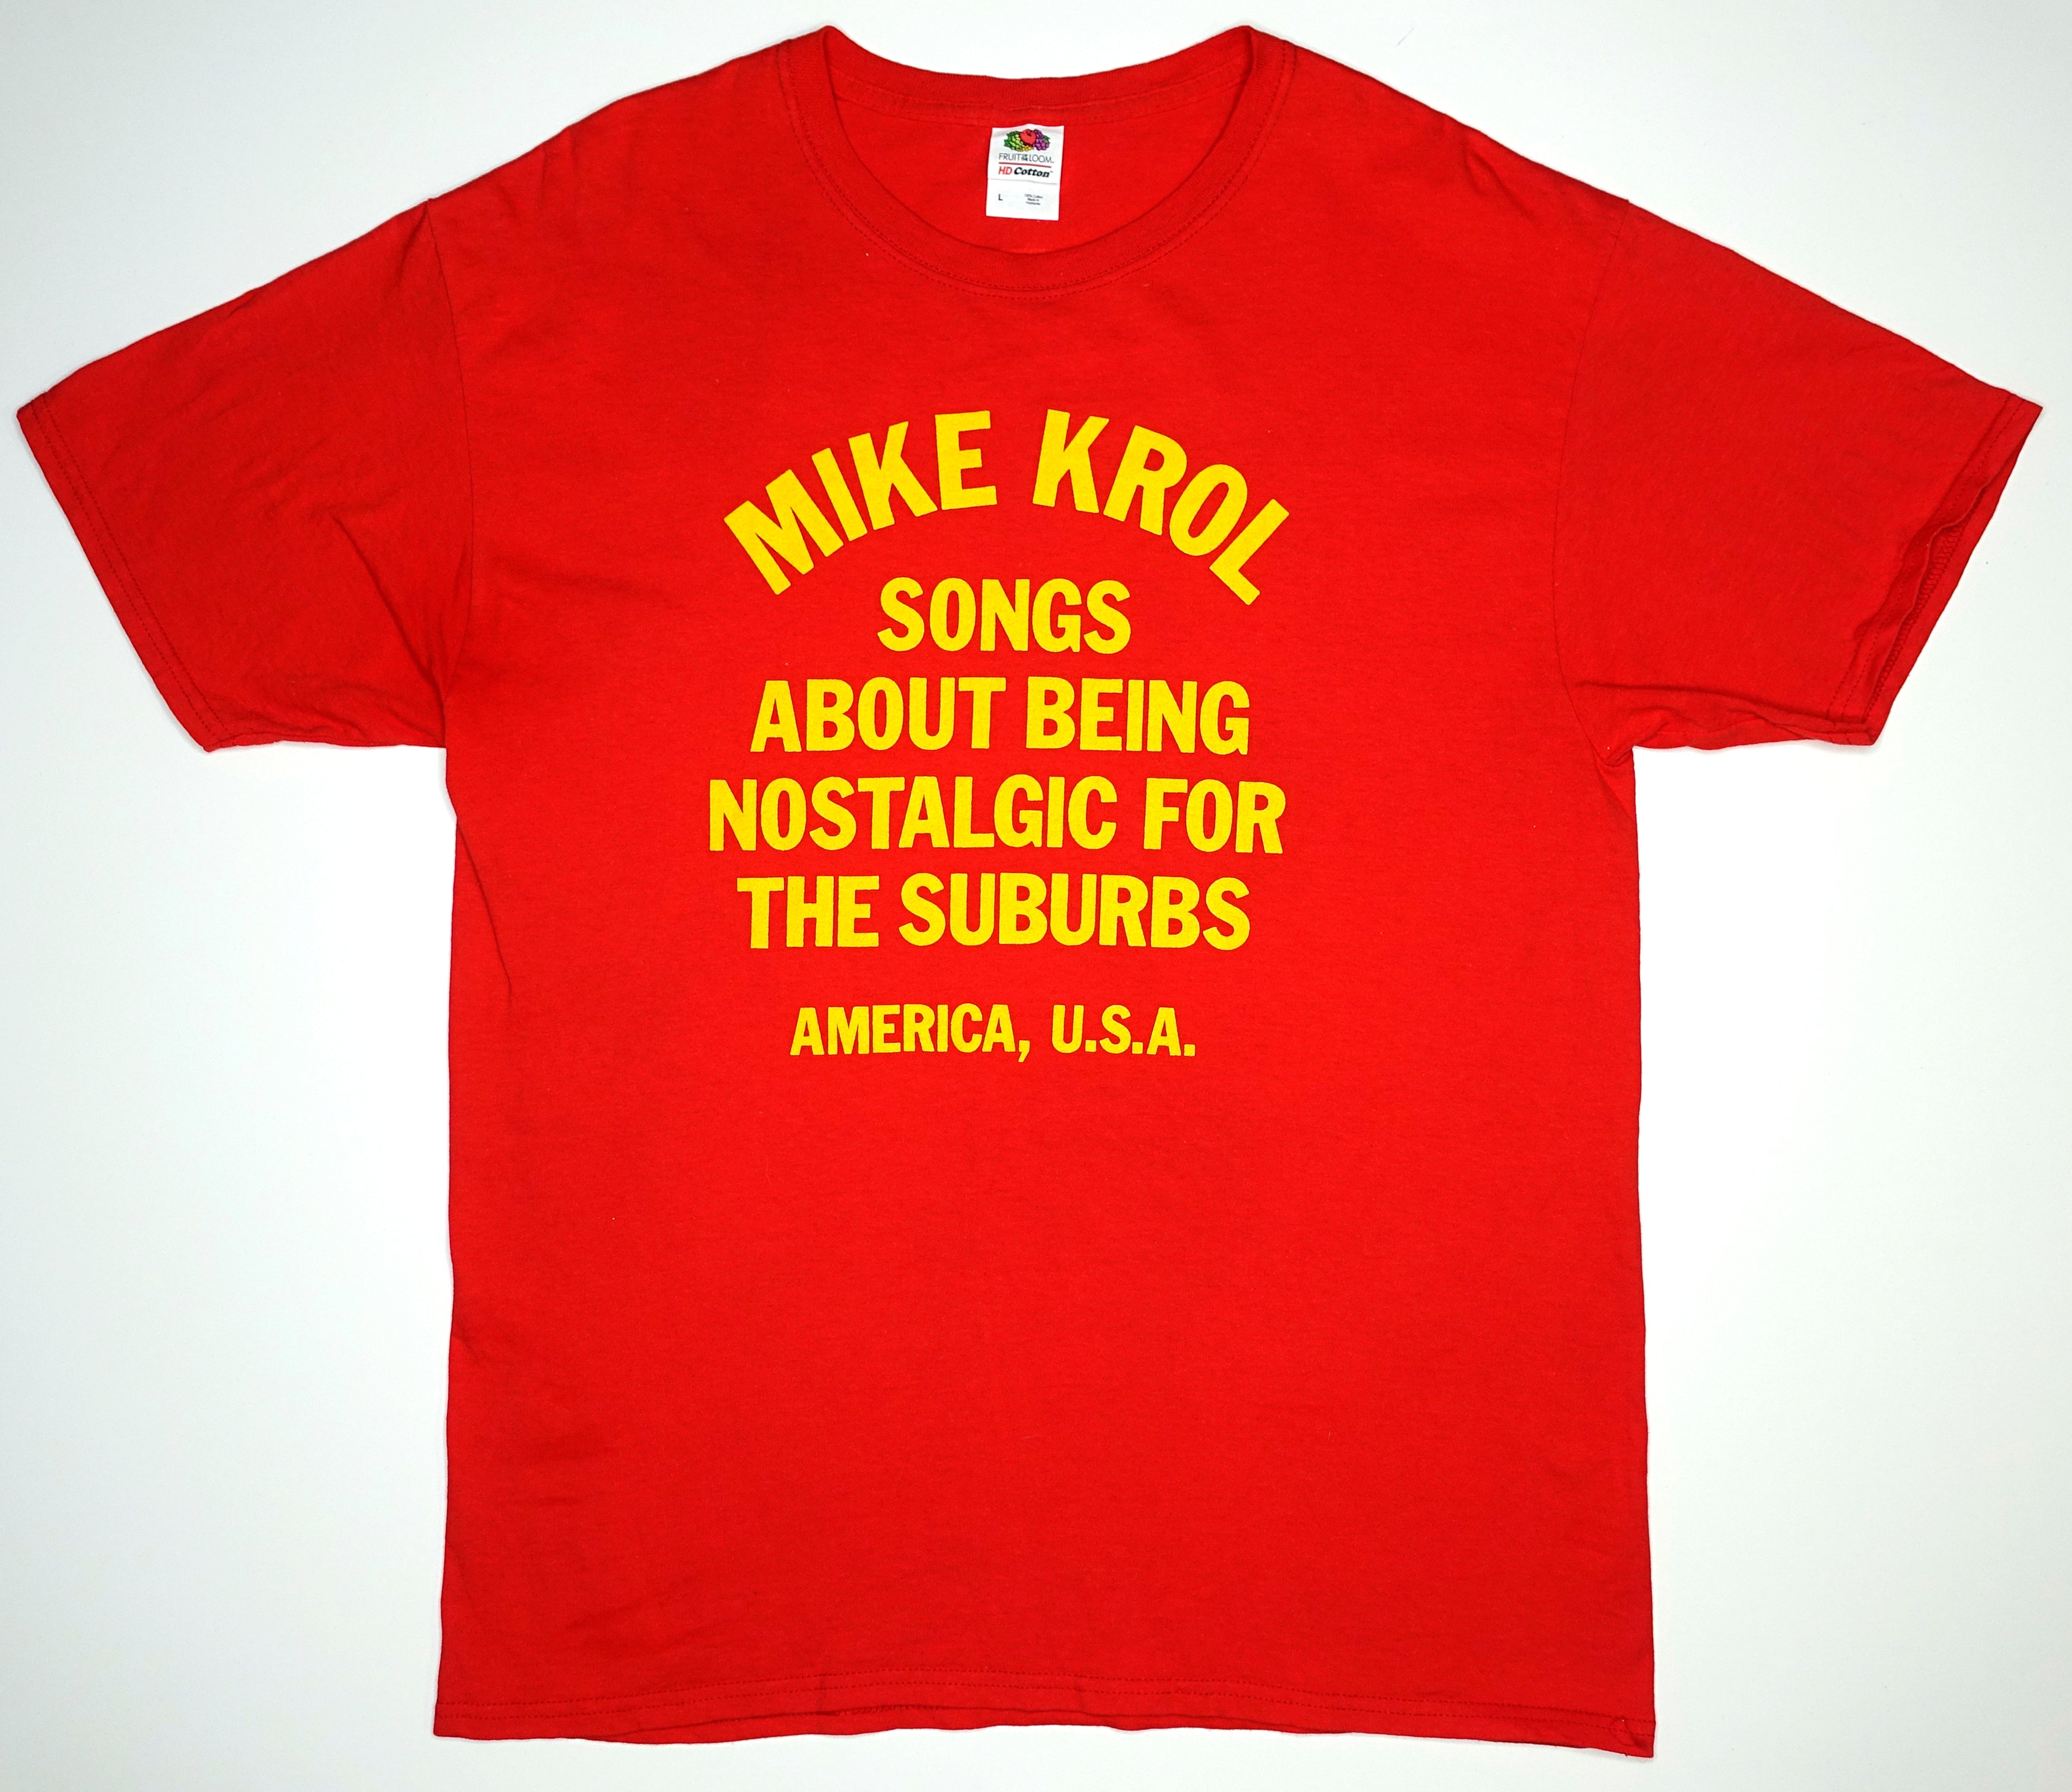 Mike Krol - Songs About Being Nostalgic 2019 Tour Shirt Size Large